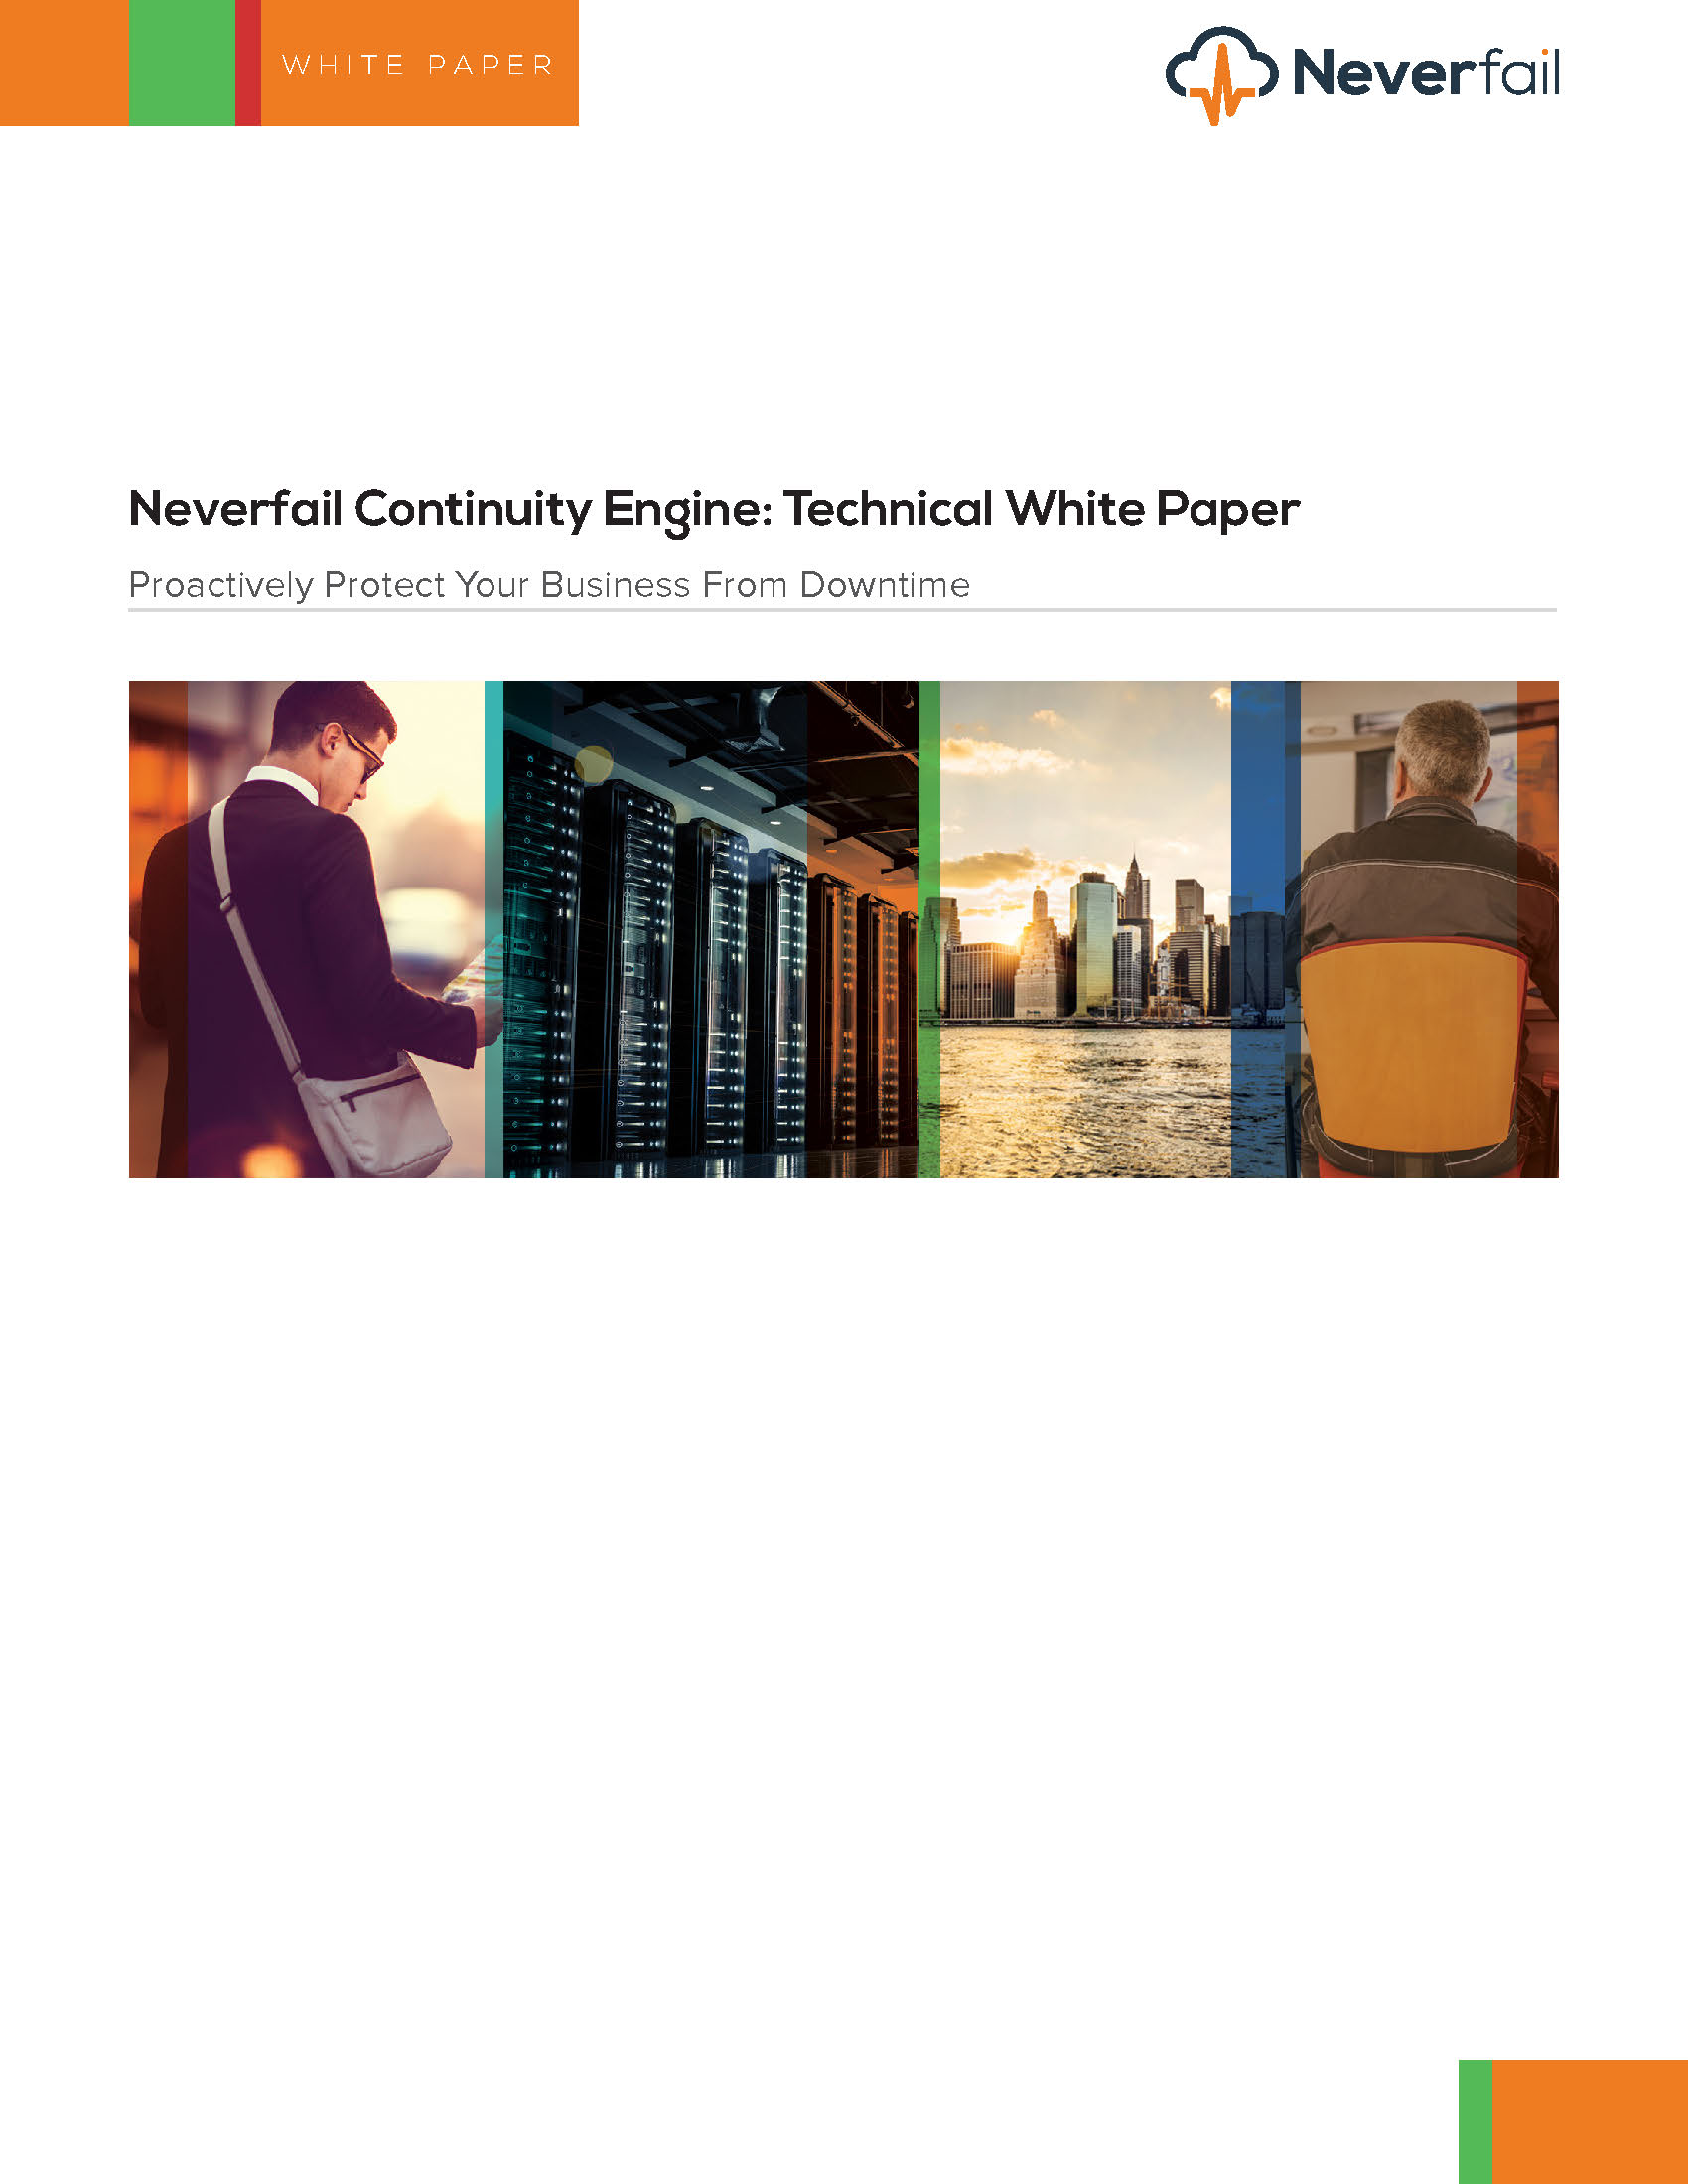 Neverfail Continuity Engine Software white paper